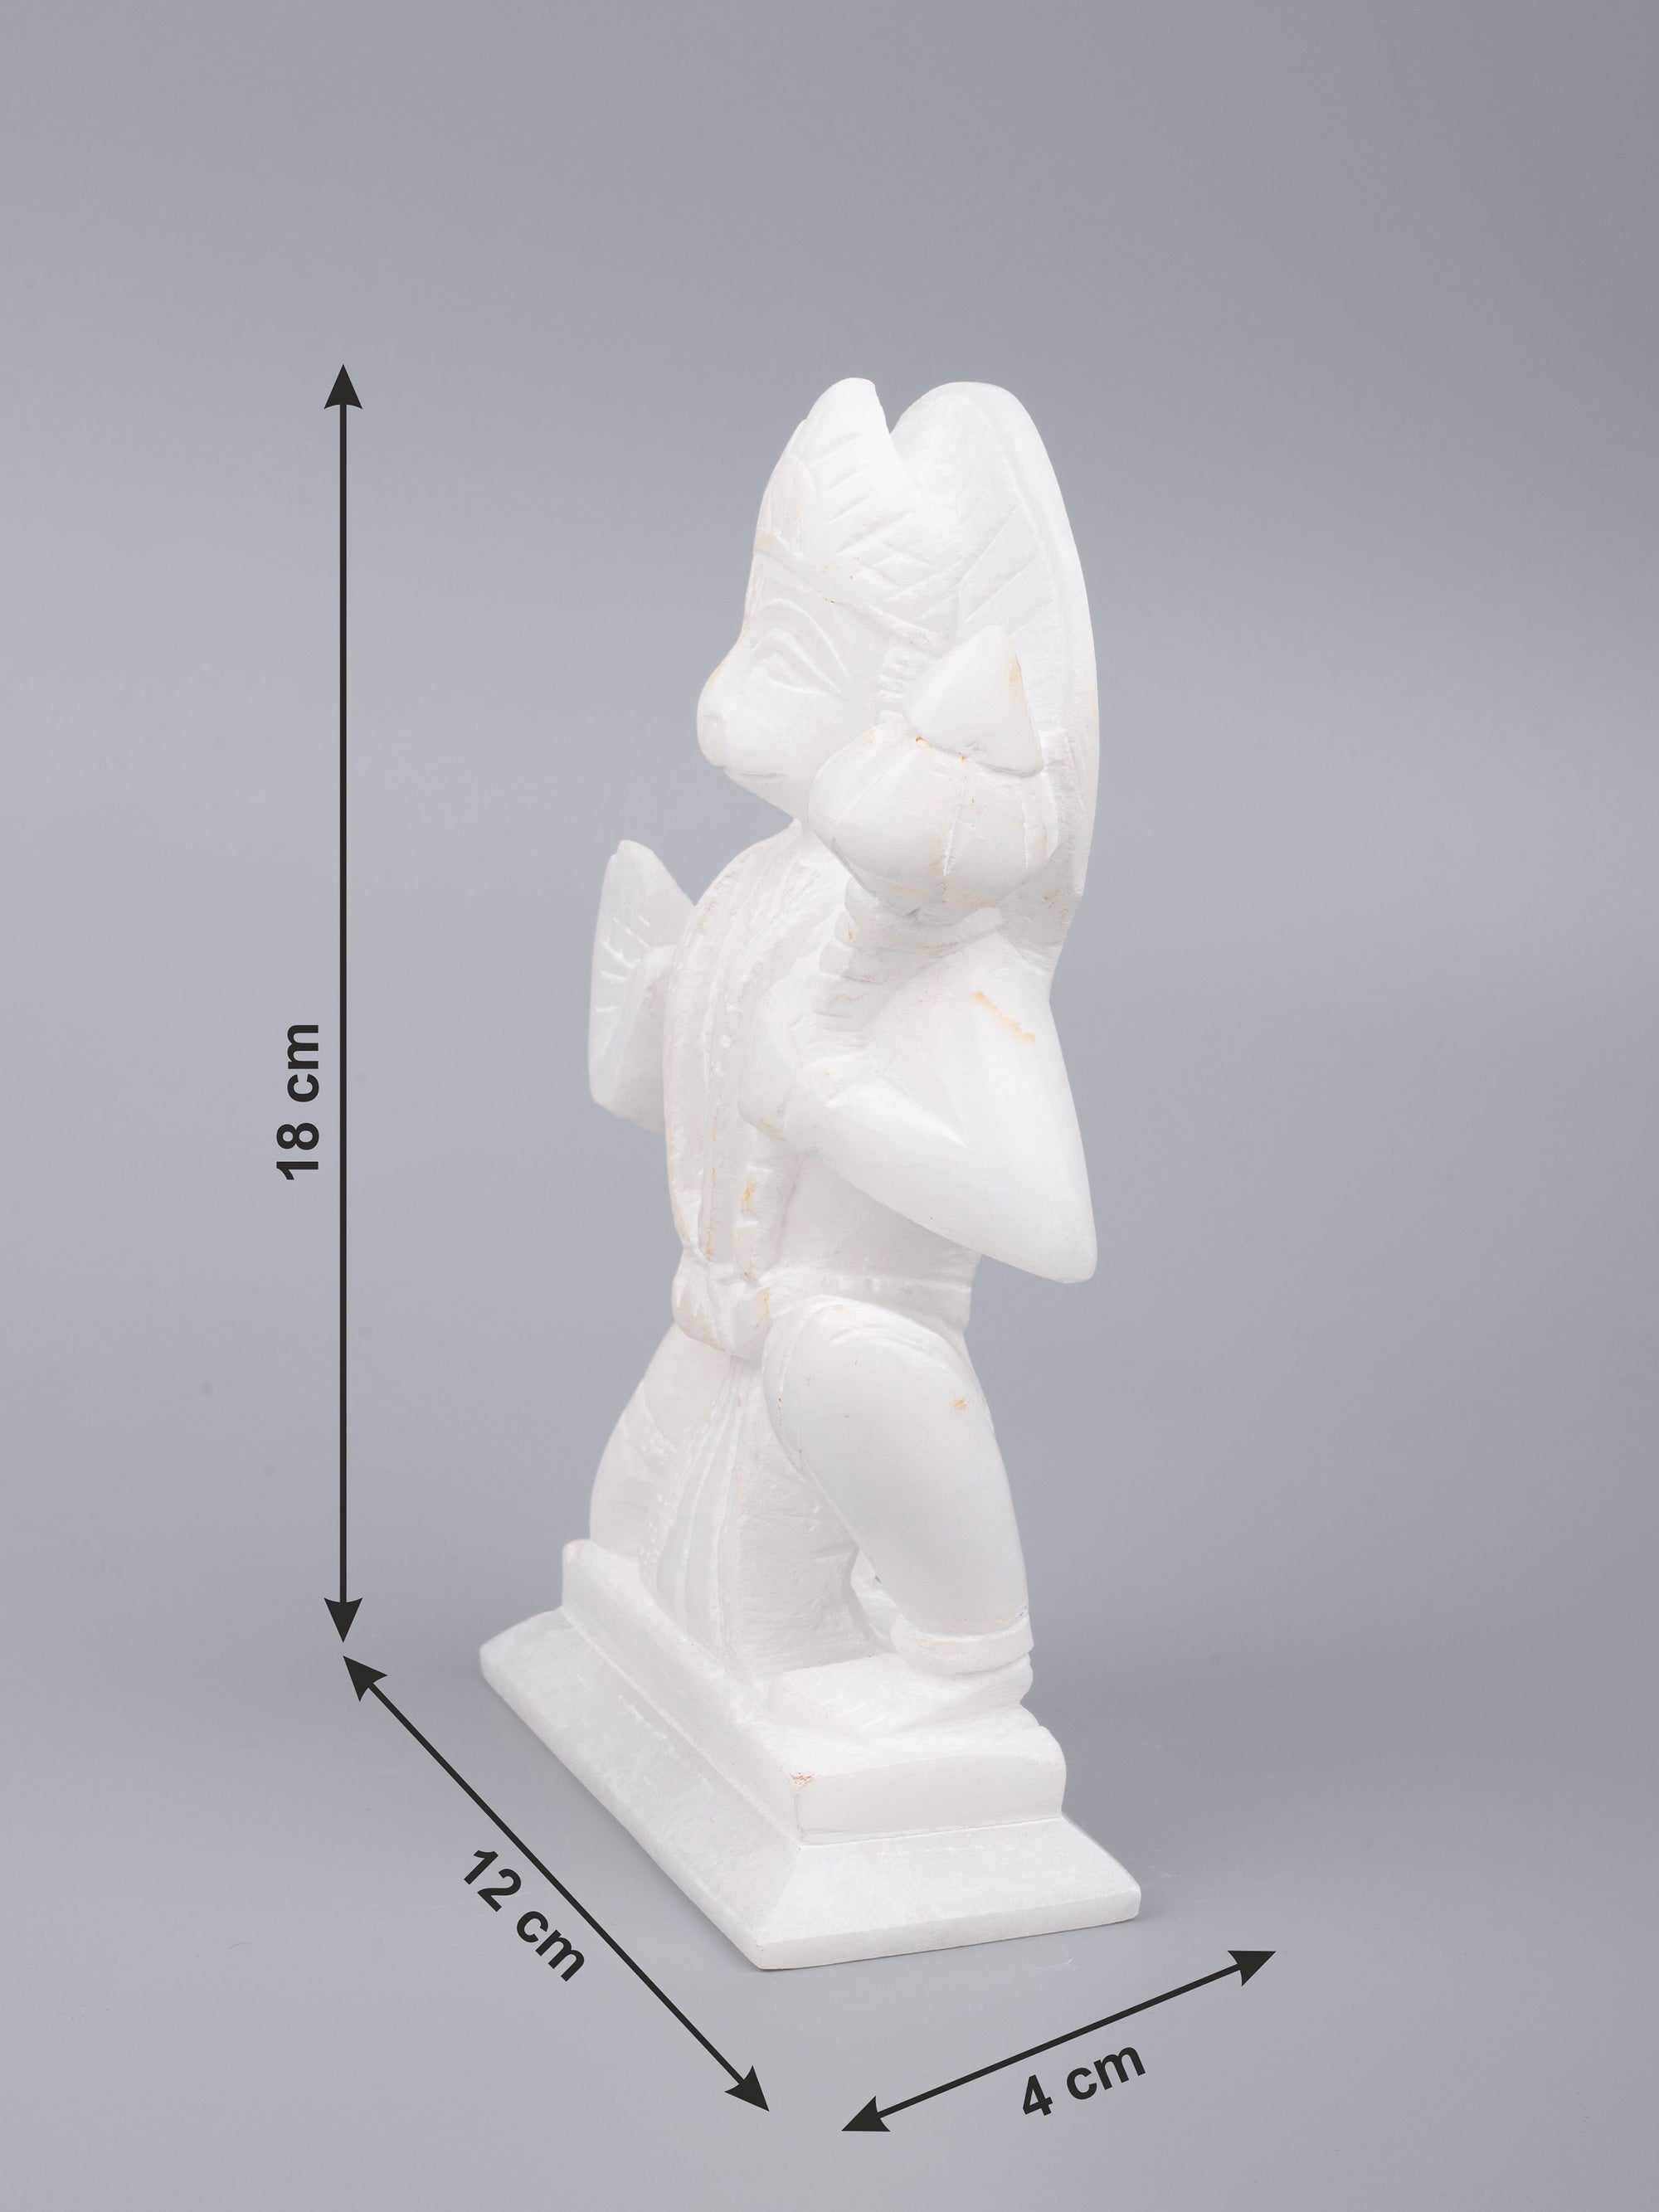 White marble Lord Hanuman statue - 6 inches height - The Heritage Artifacts